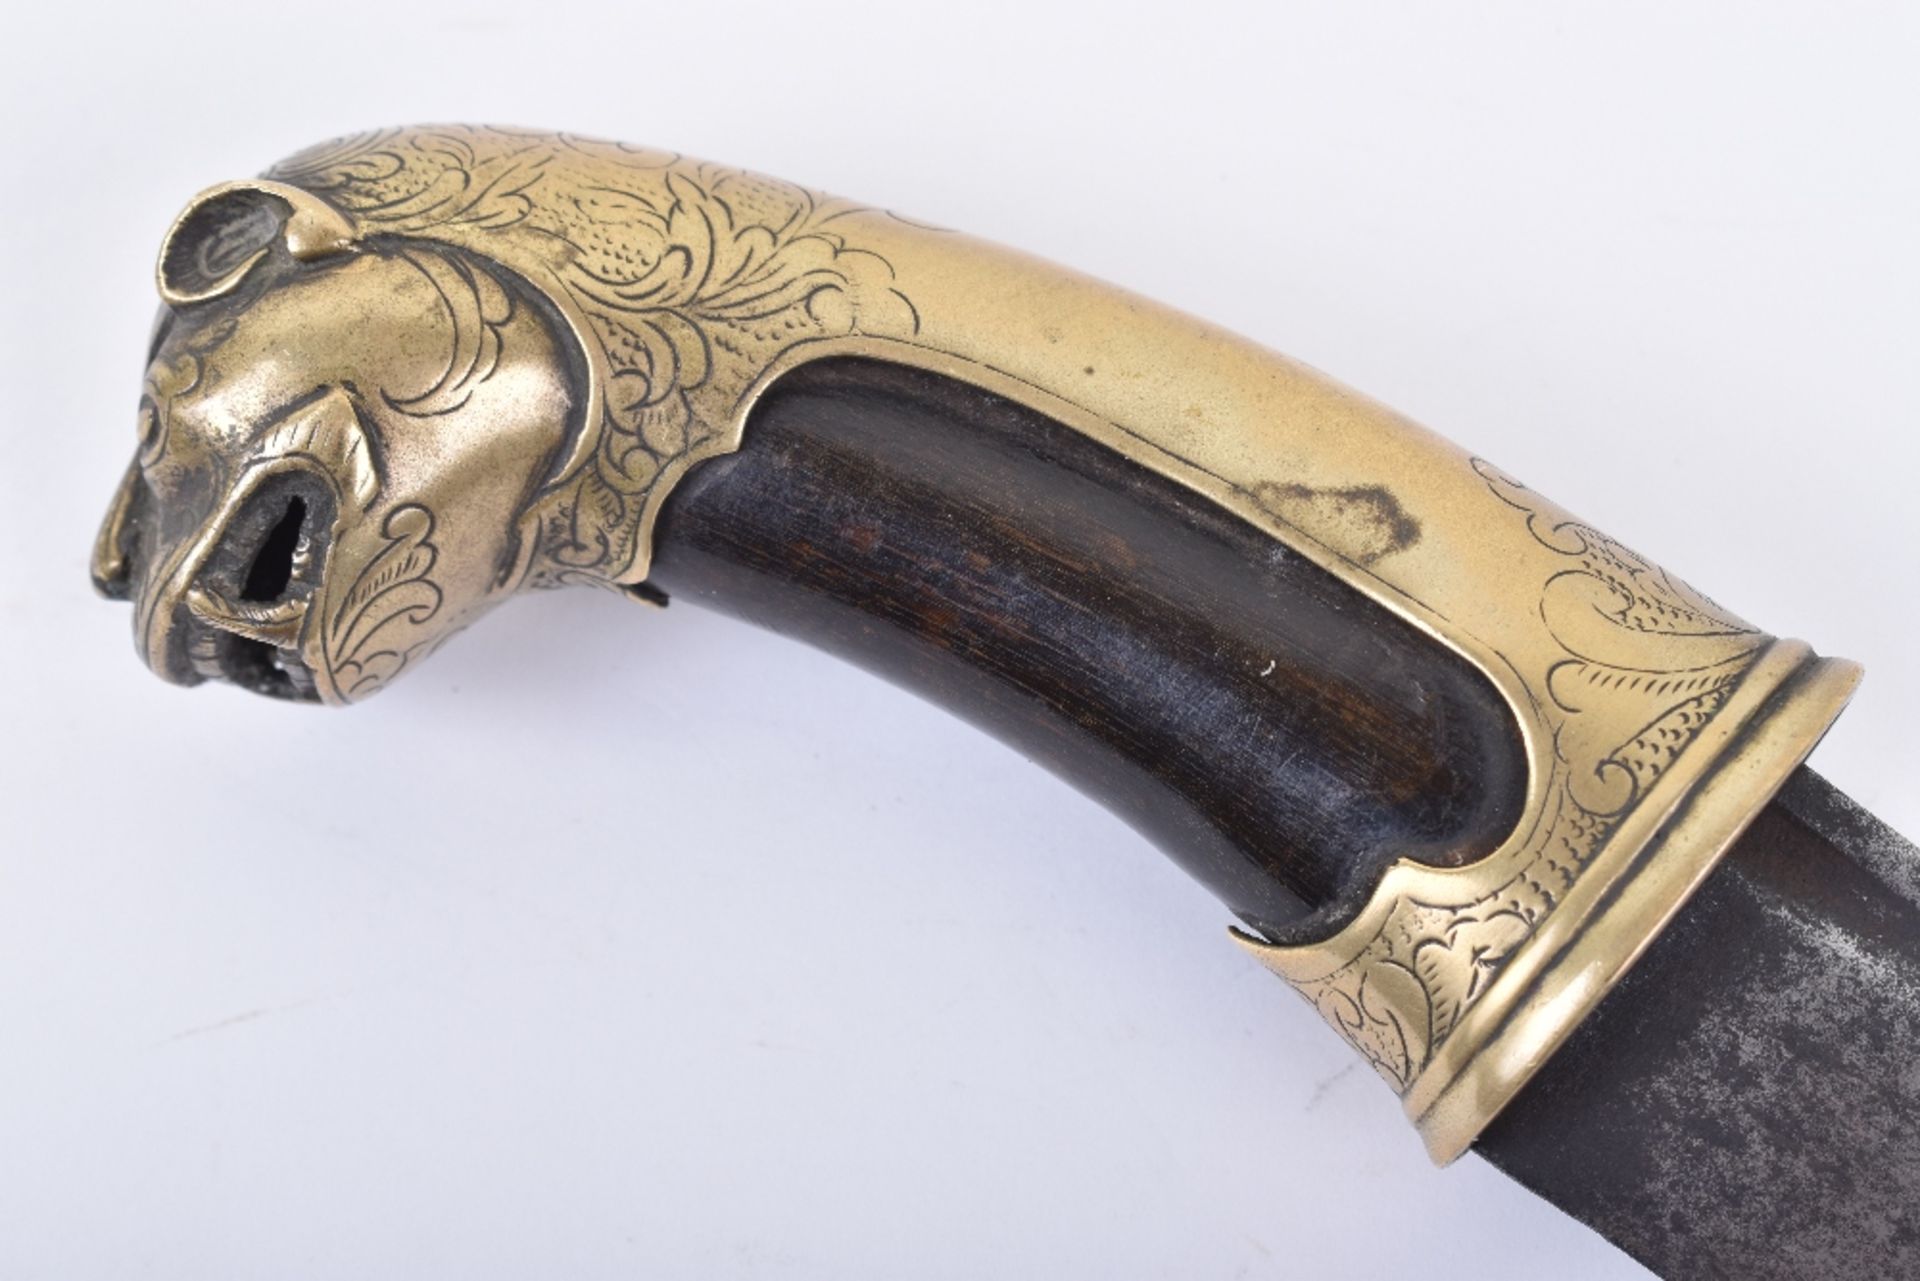 Rare and Unusual Chinese Short Sword, Late 18th Century - Image 6 of 17